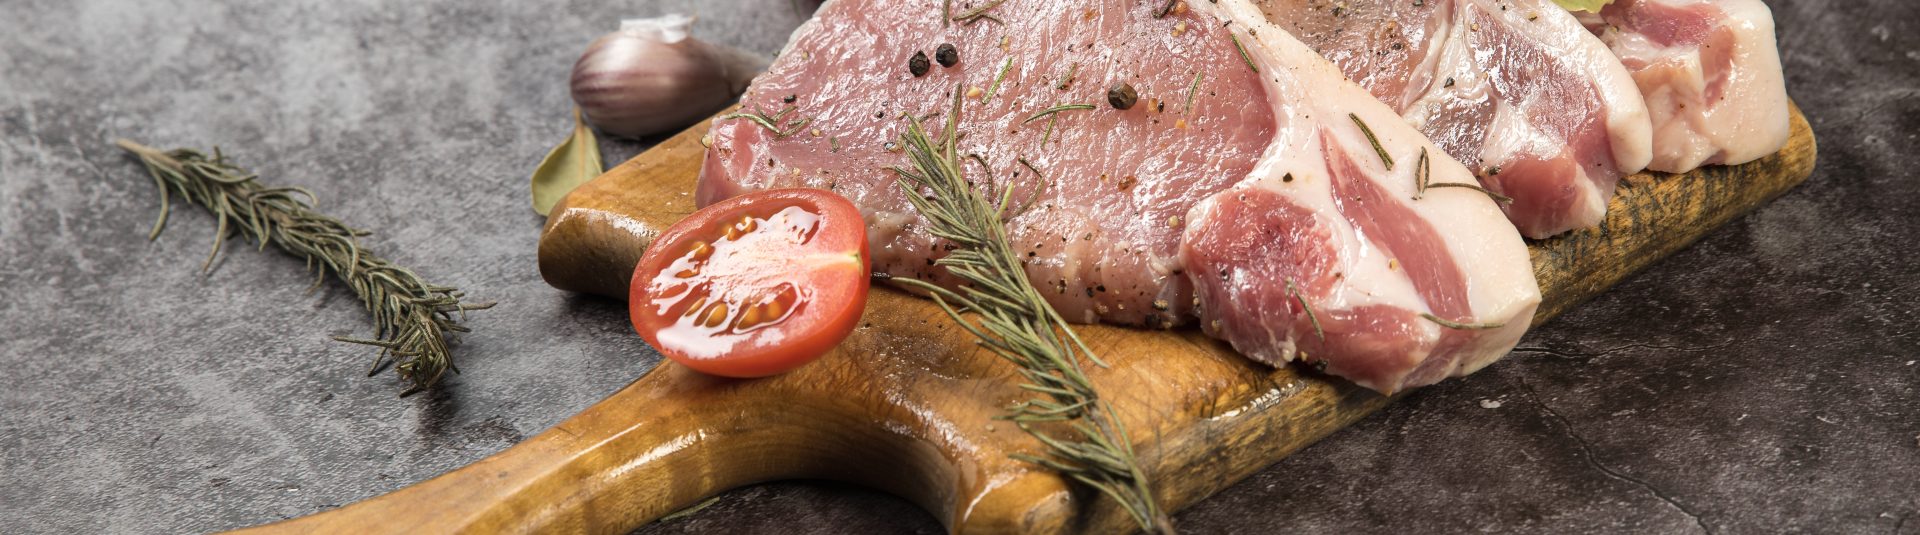 2022 meat trends from your Smithfield market meat suppliers